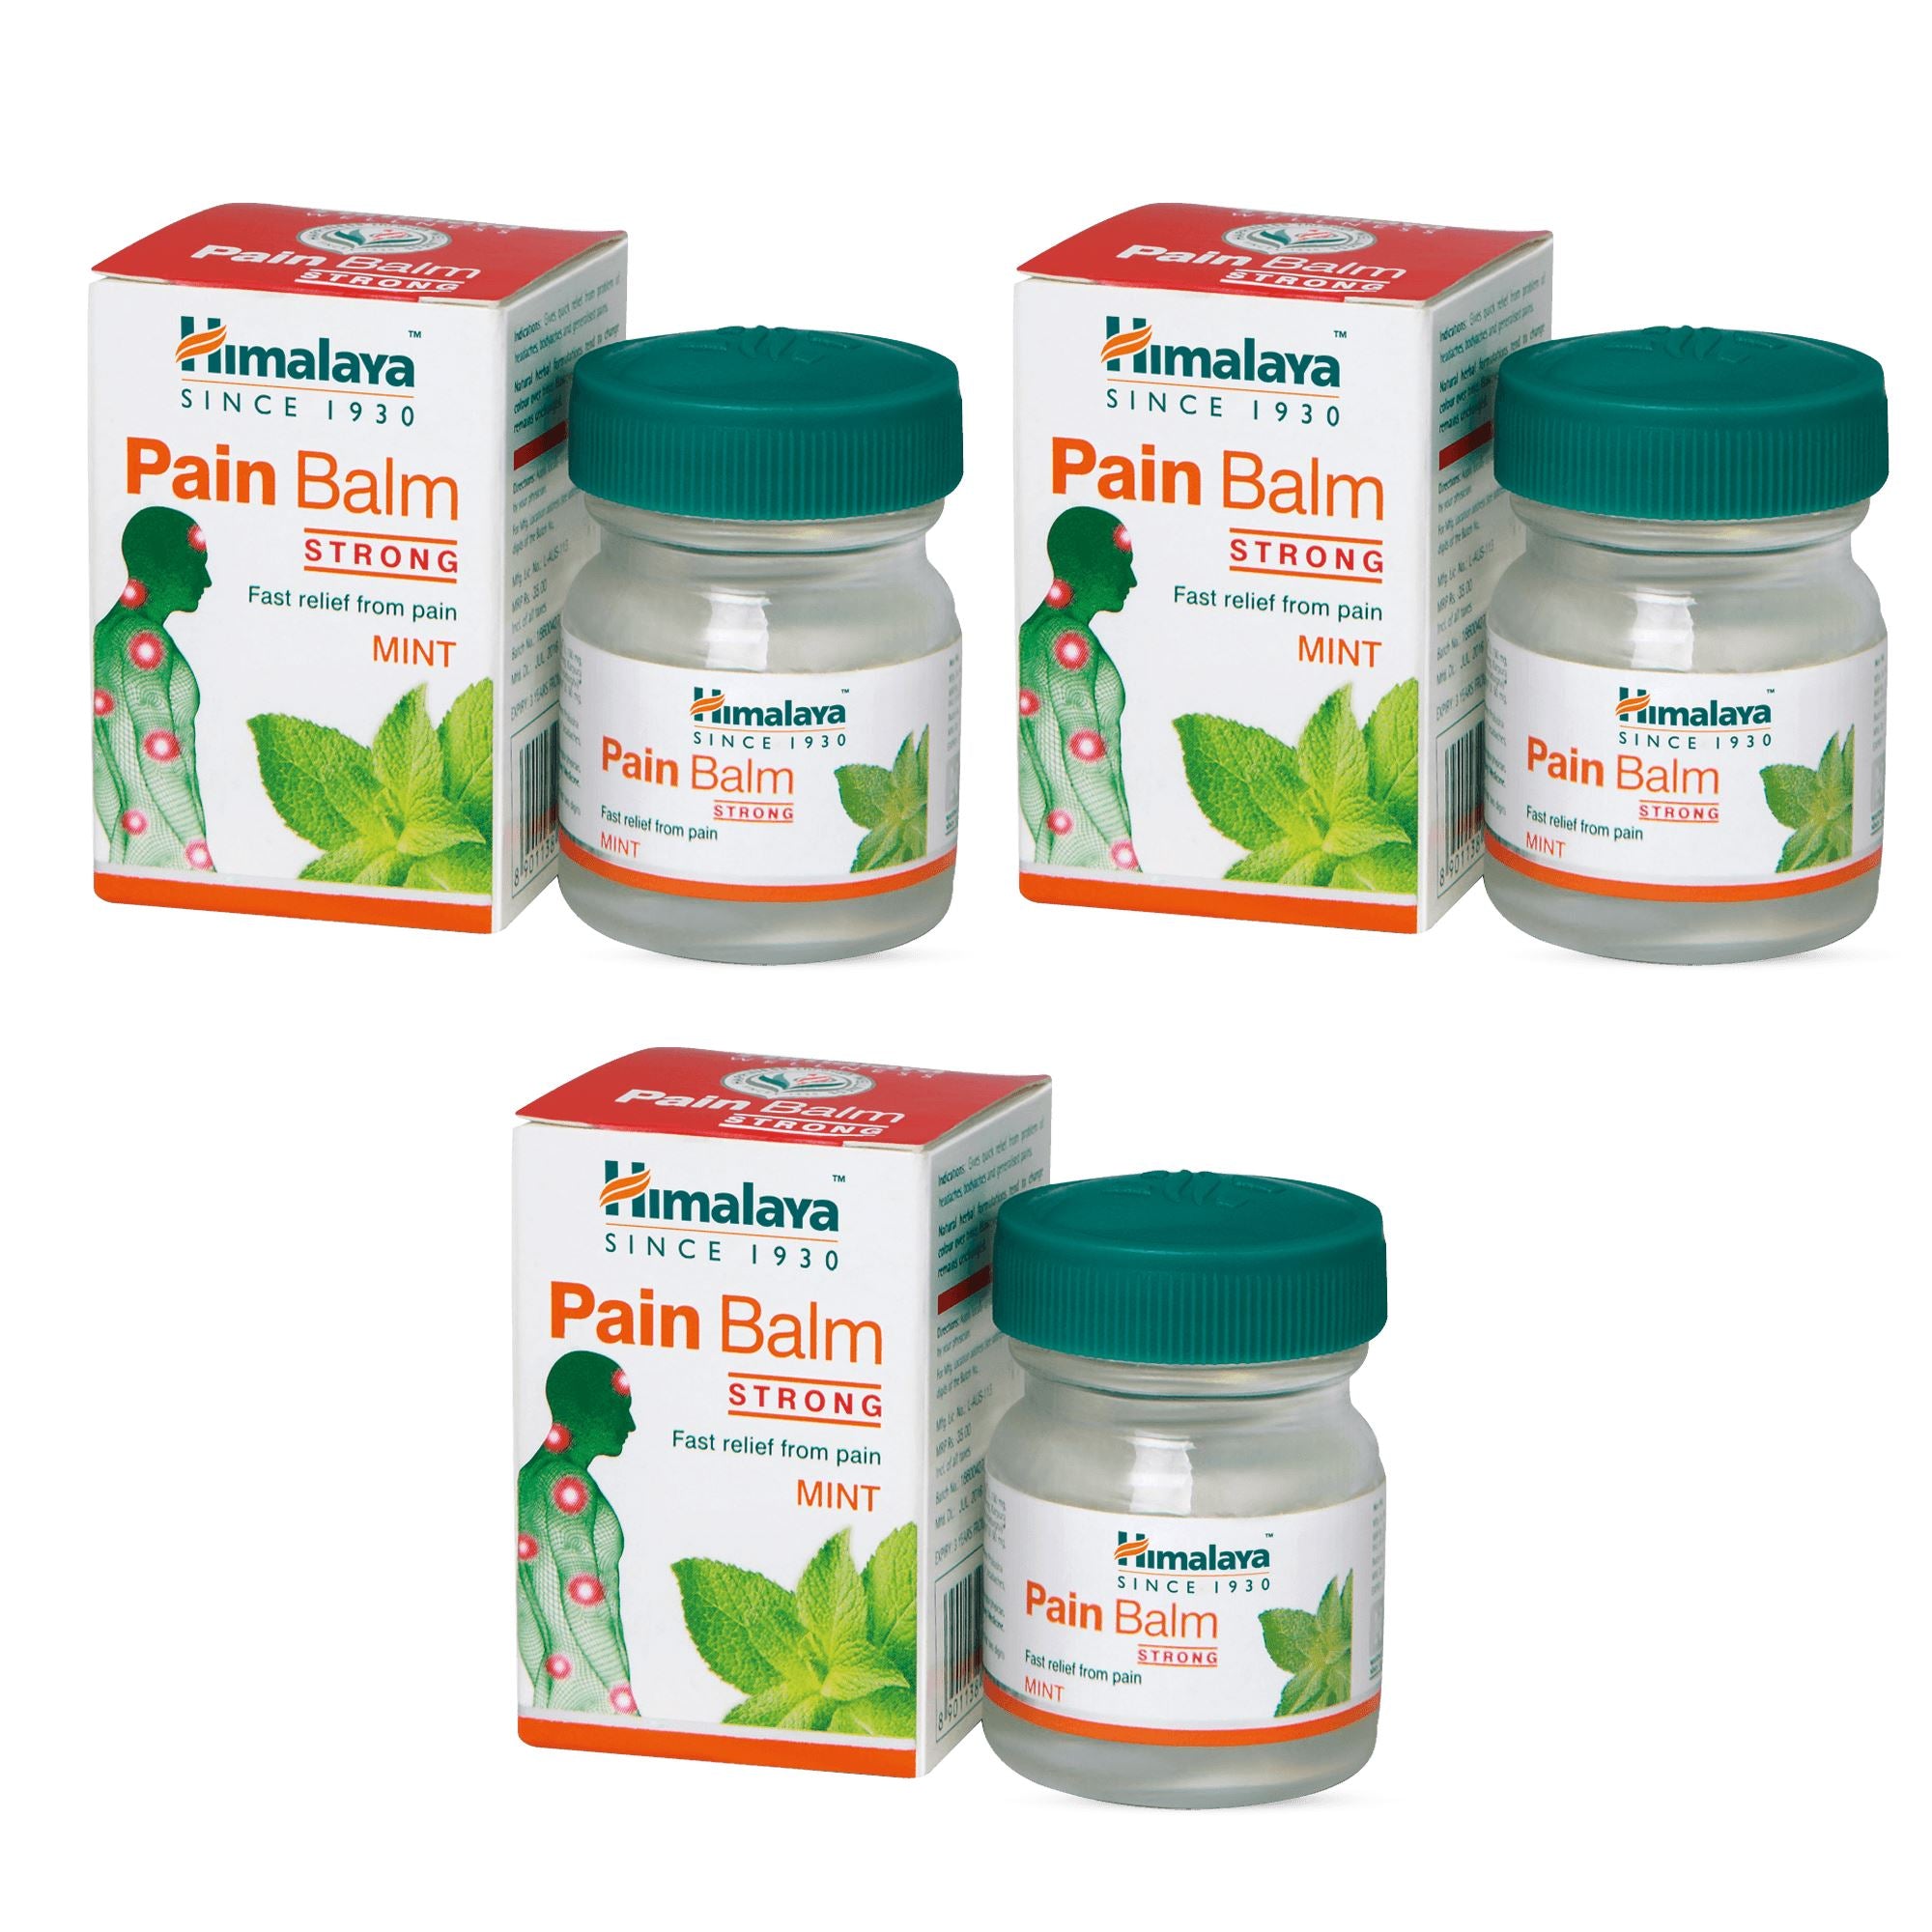 Himalaya Pain Balm STRONG - Fast relief from pain